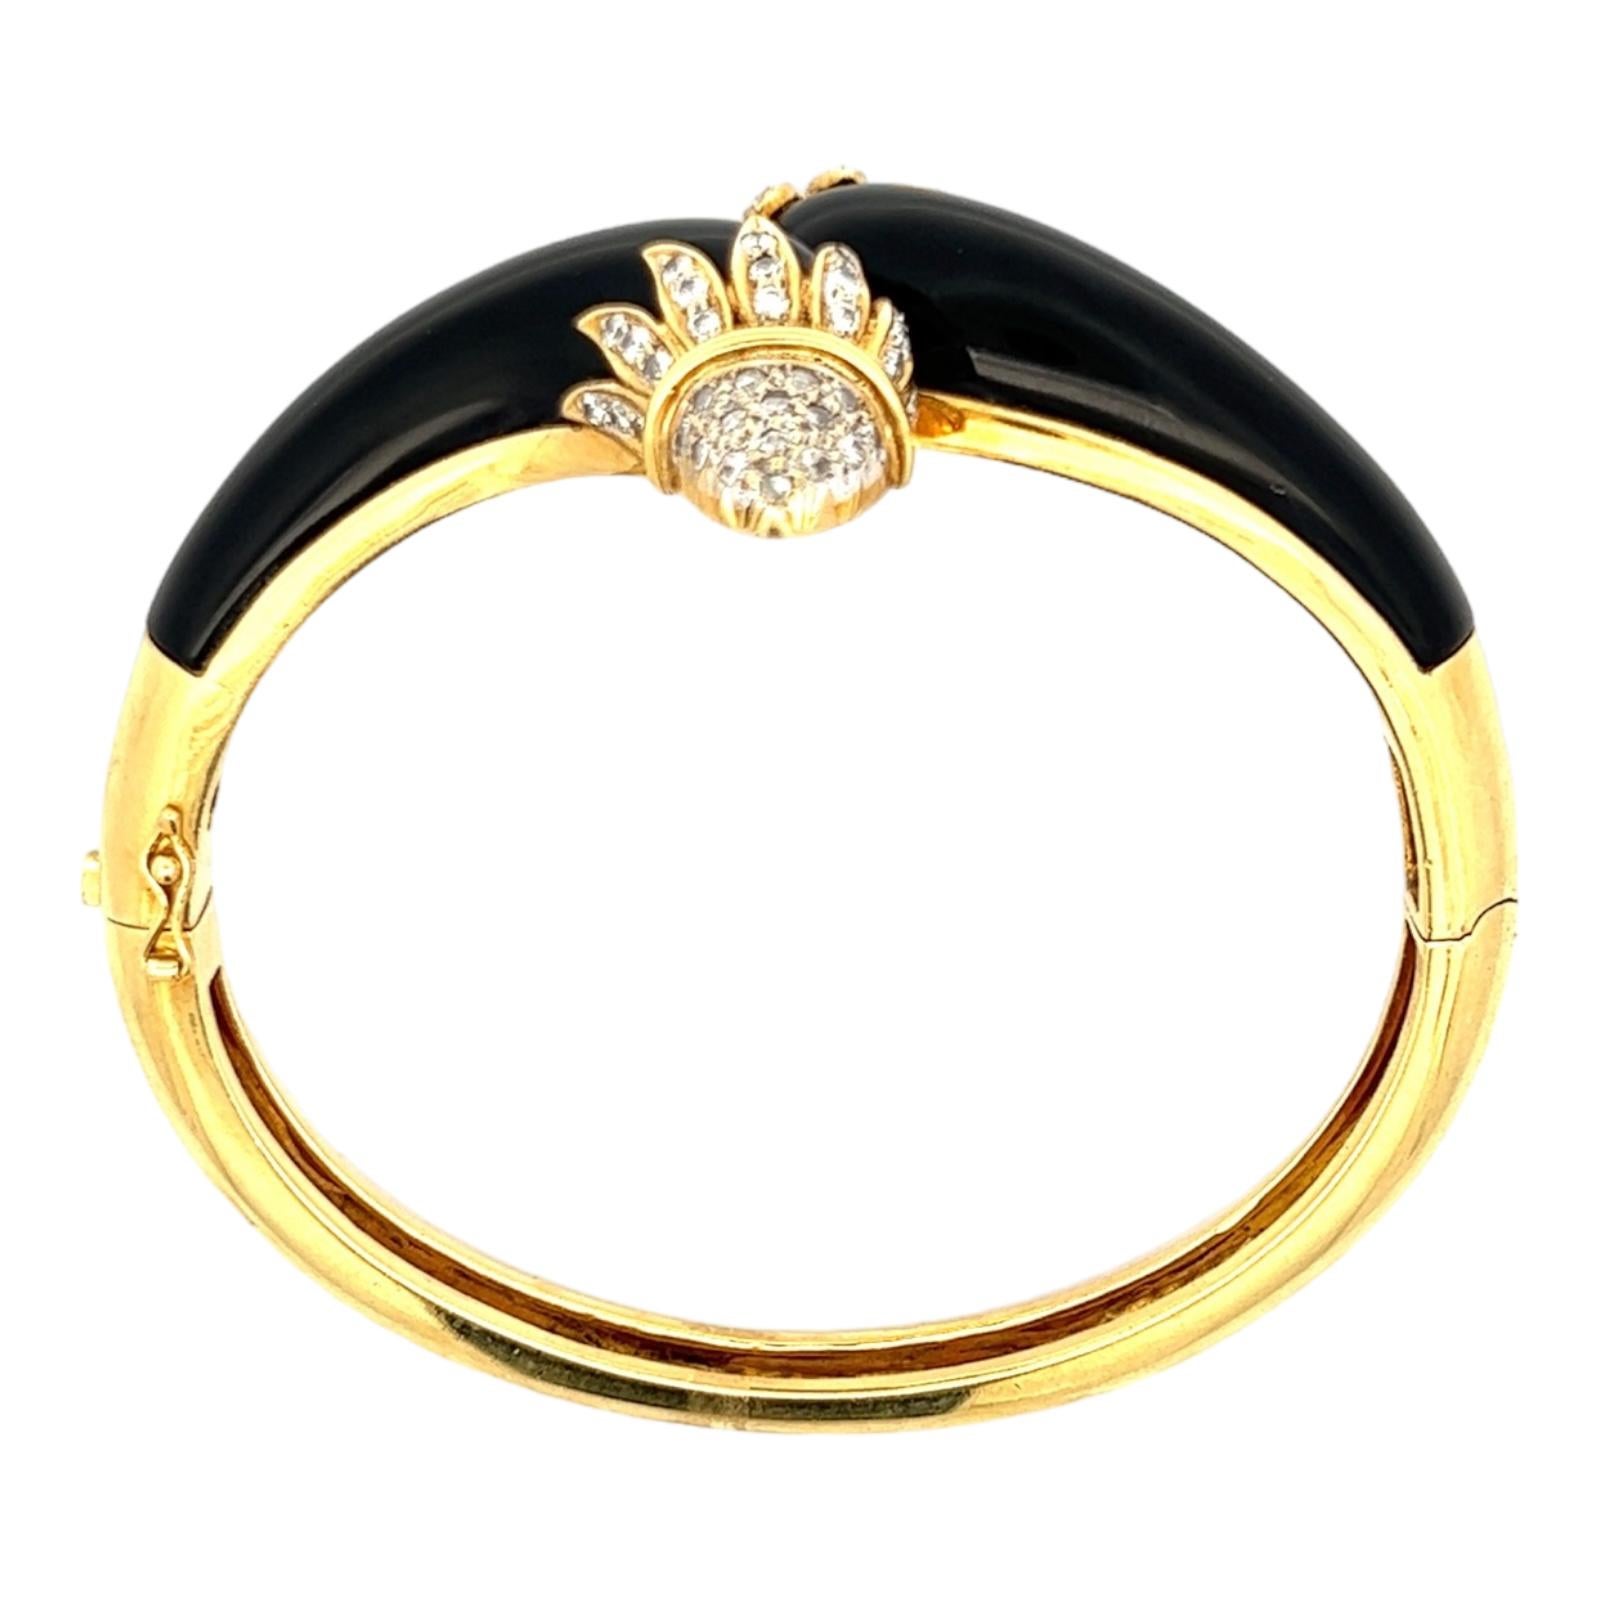 1960s Diamond Onyx 18 Karat Yellow Gold Estate Hinged Bangle Bracelet In Excellent Condition For Sale In Boca Raton, FL